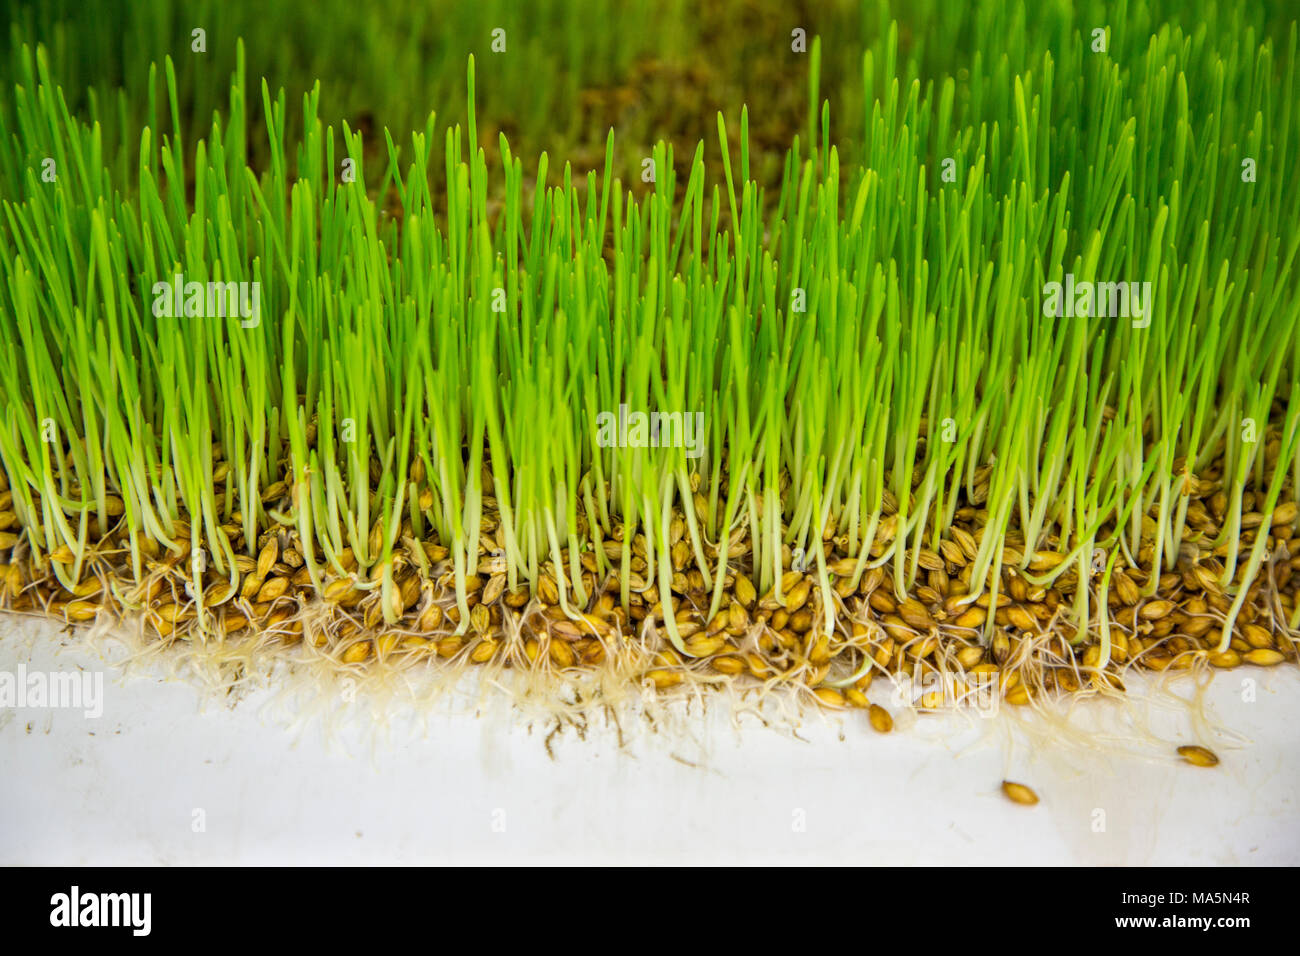 Hydroponic Agriculture, Cultivation of Barley.  Dyersville, Iowa, USA. Stock Photo